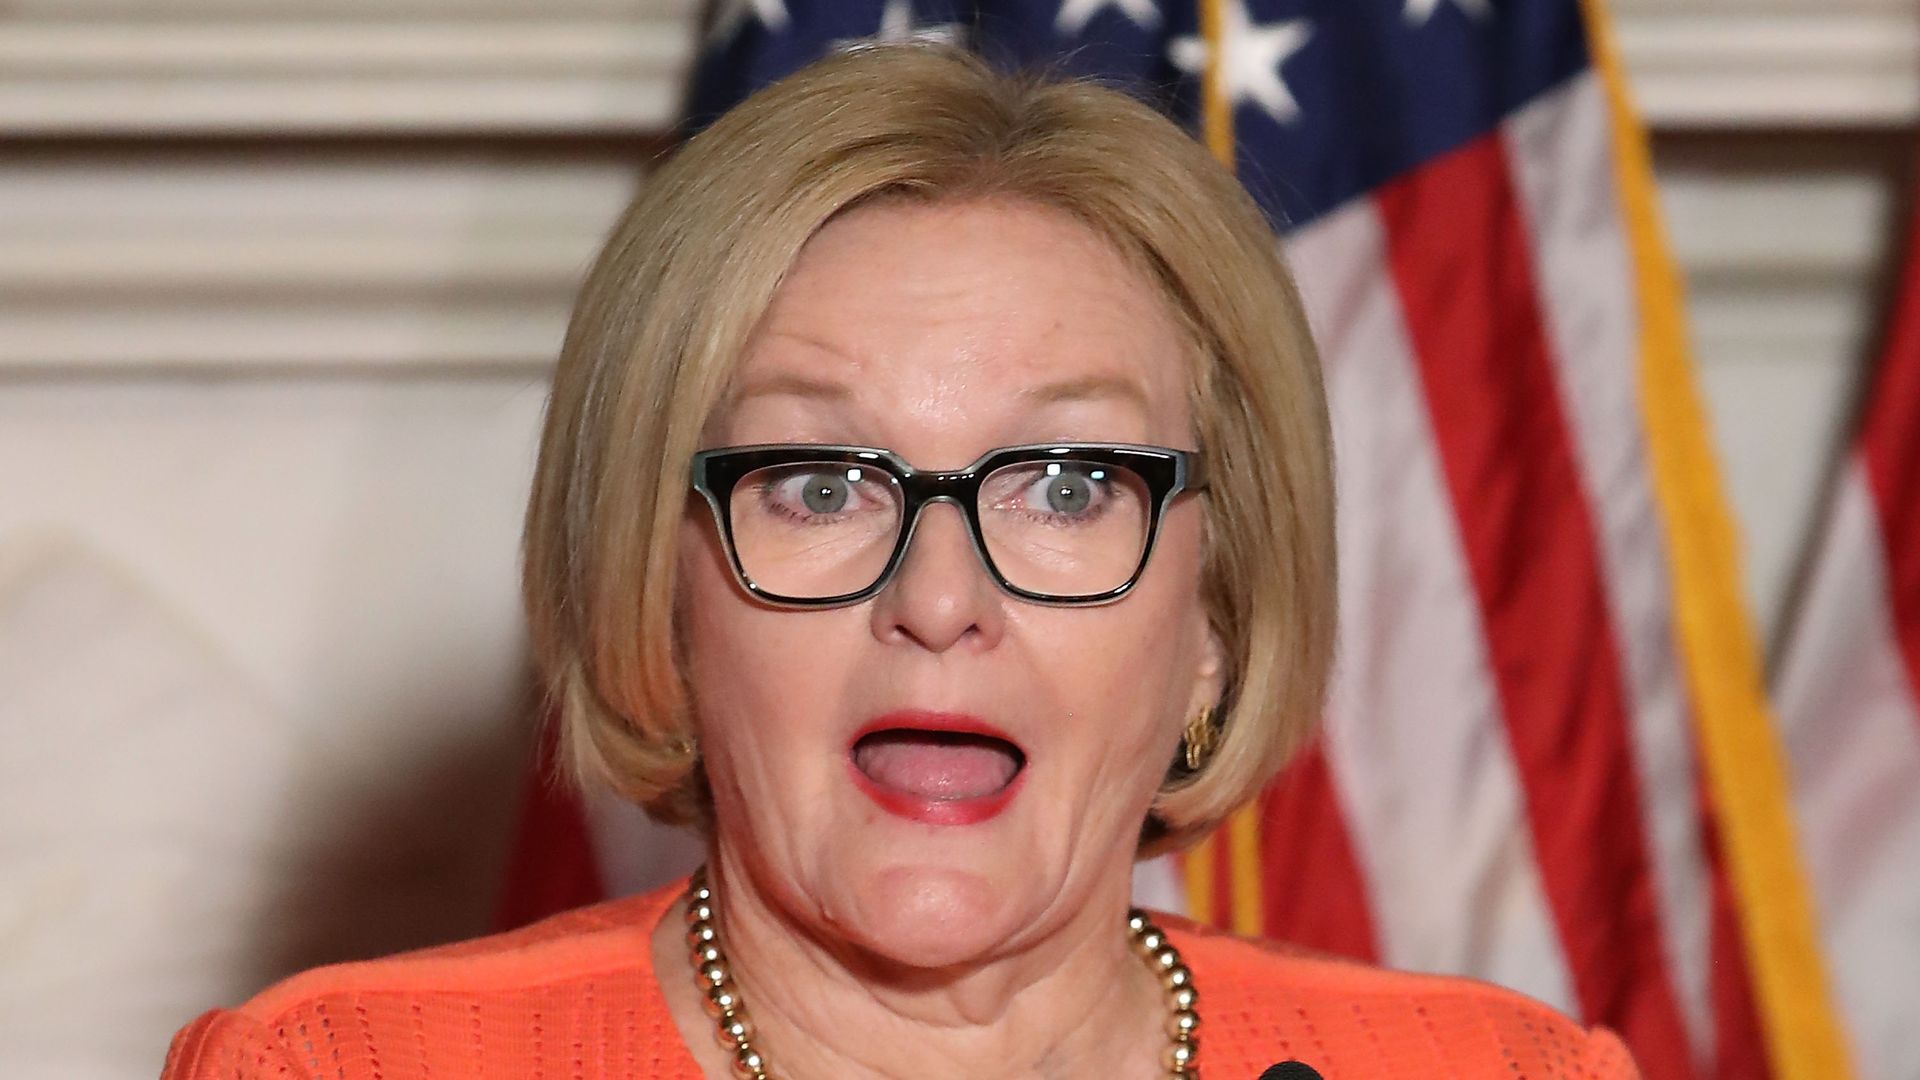 Claire McCaskill looks surprised with mouth agape.